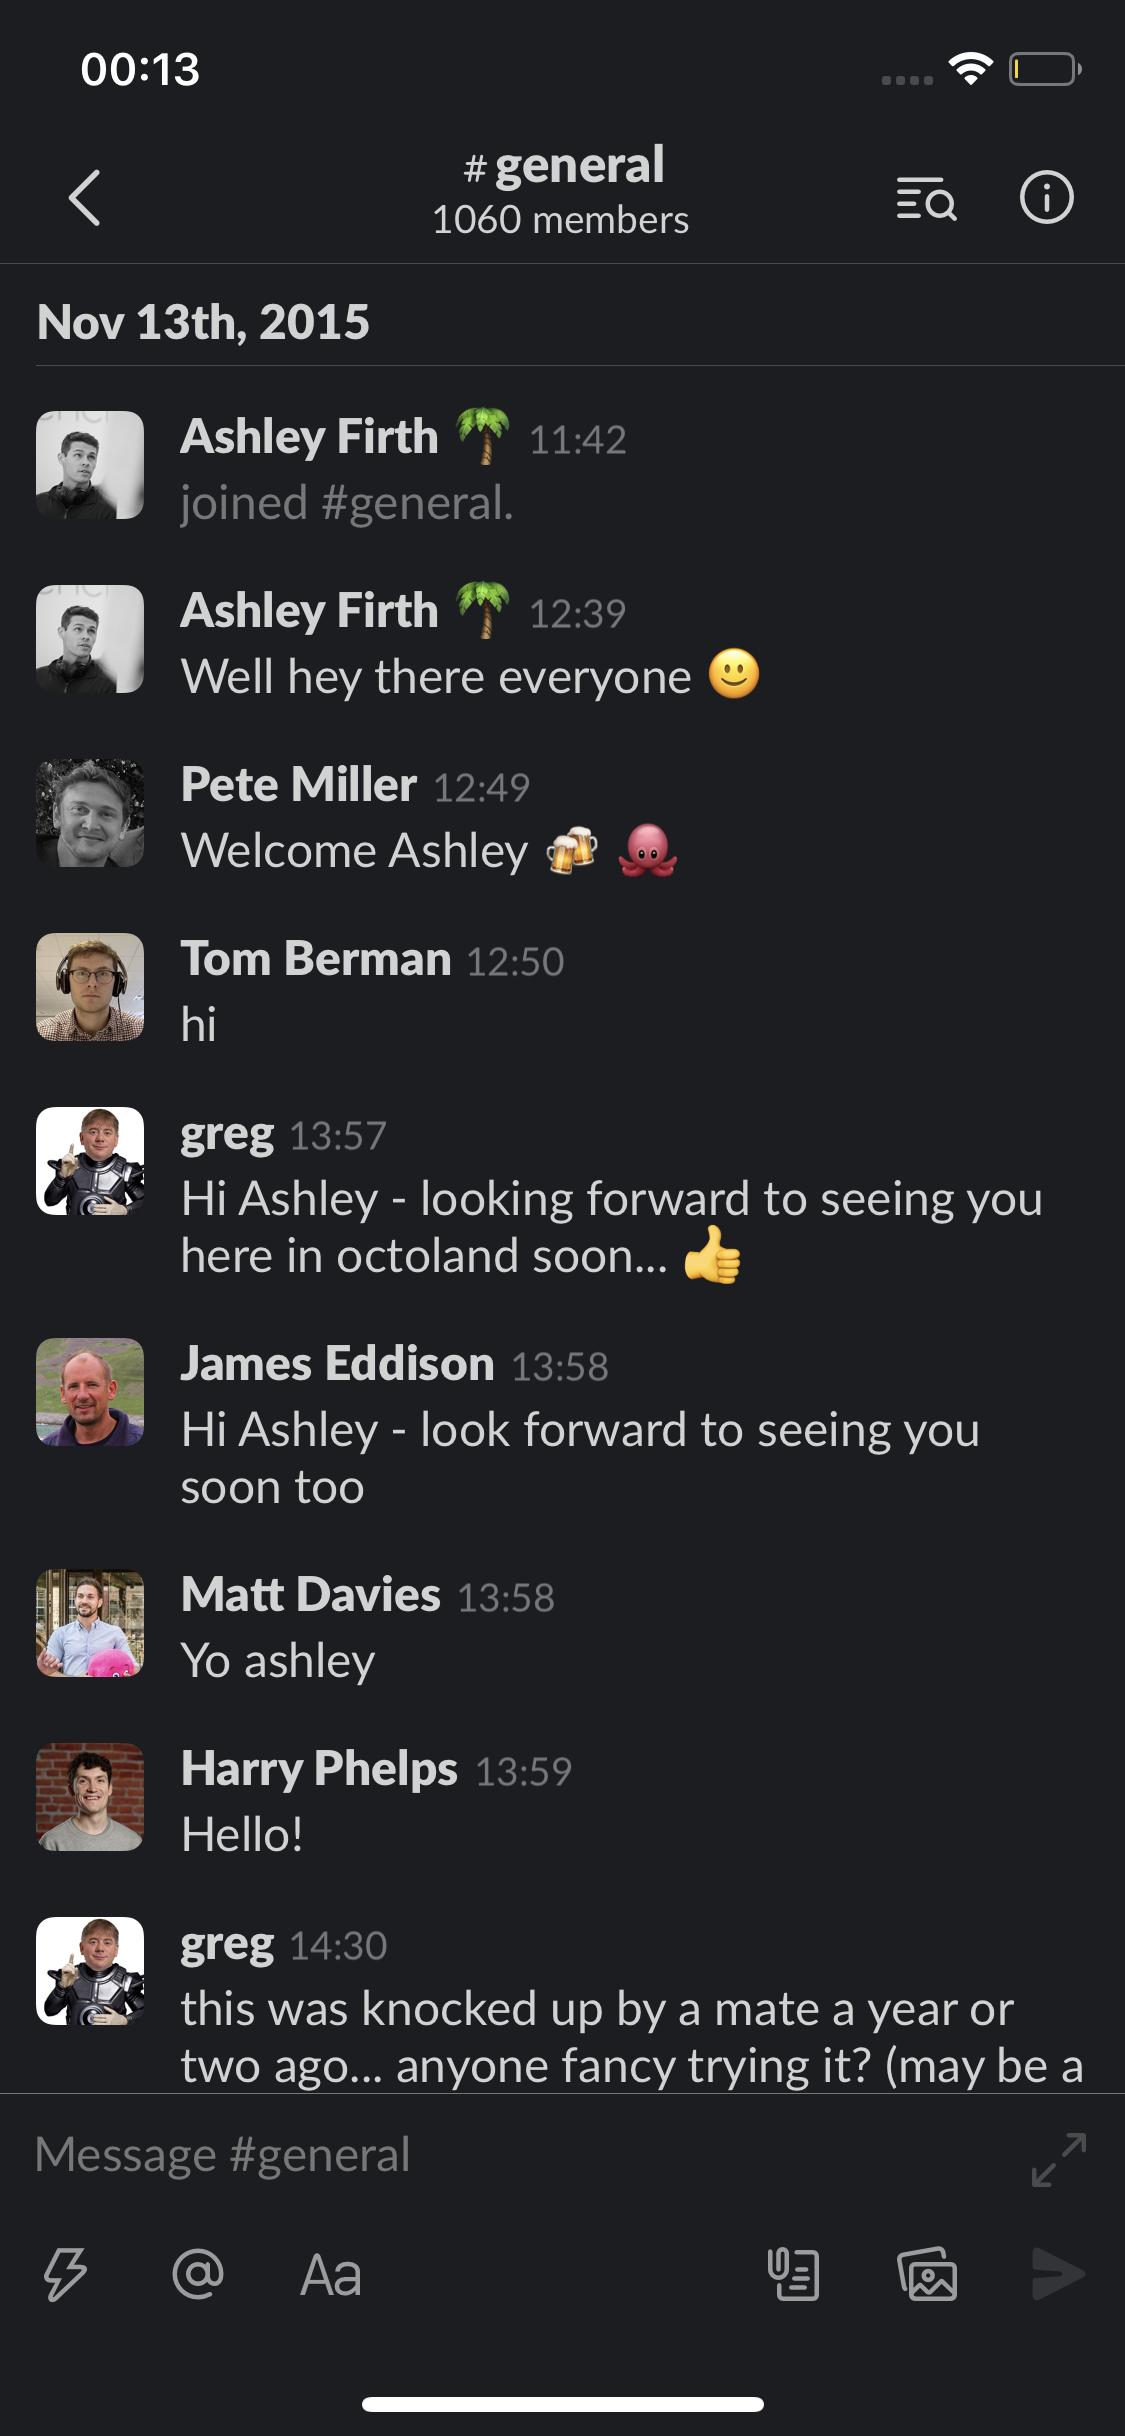 Me joining and posting on the Slack General channel for the first time. It was a simple "hey there everyone". Classy.